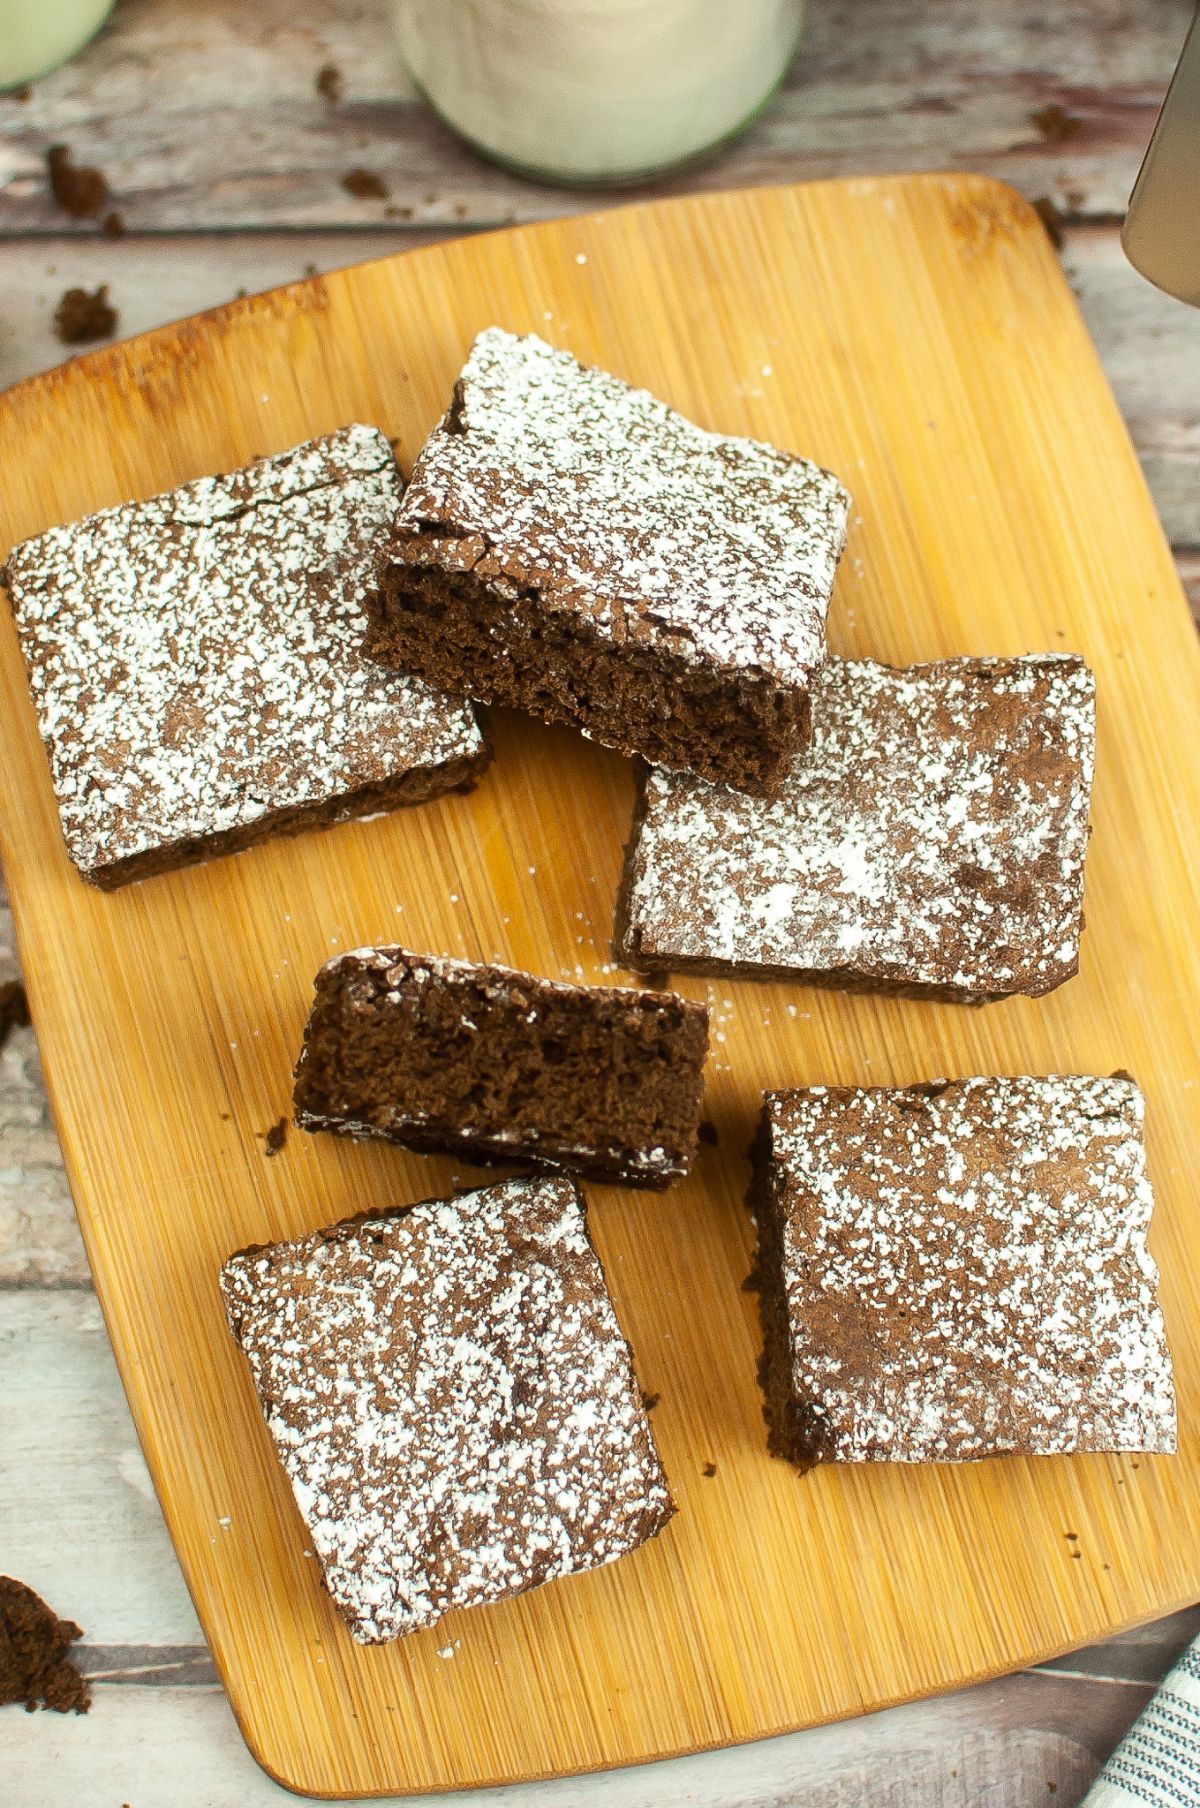 A brownie is cut into squares on a wooden chopping board.